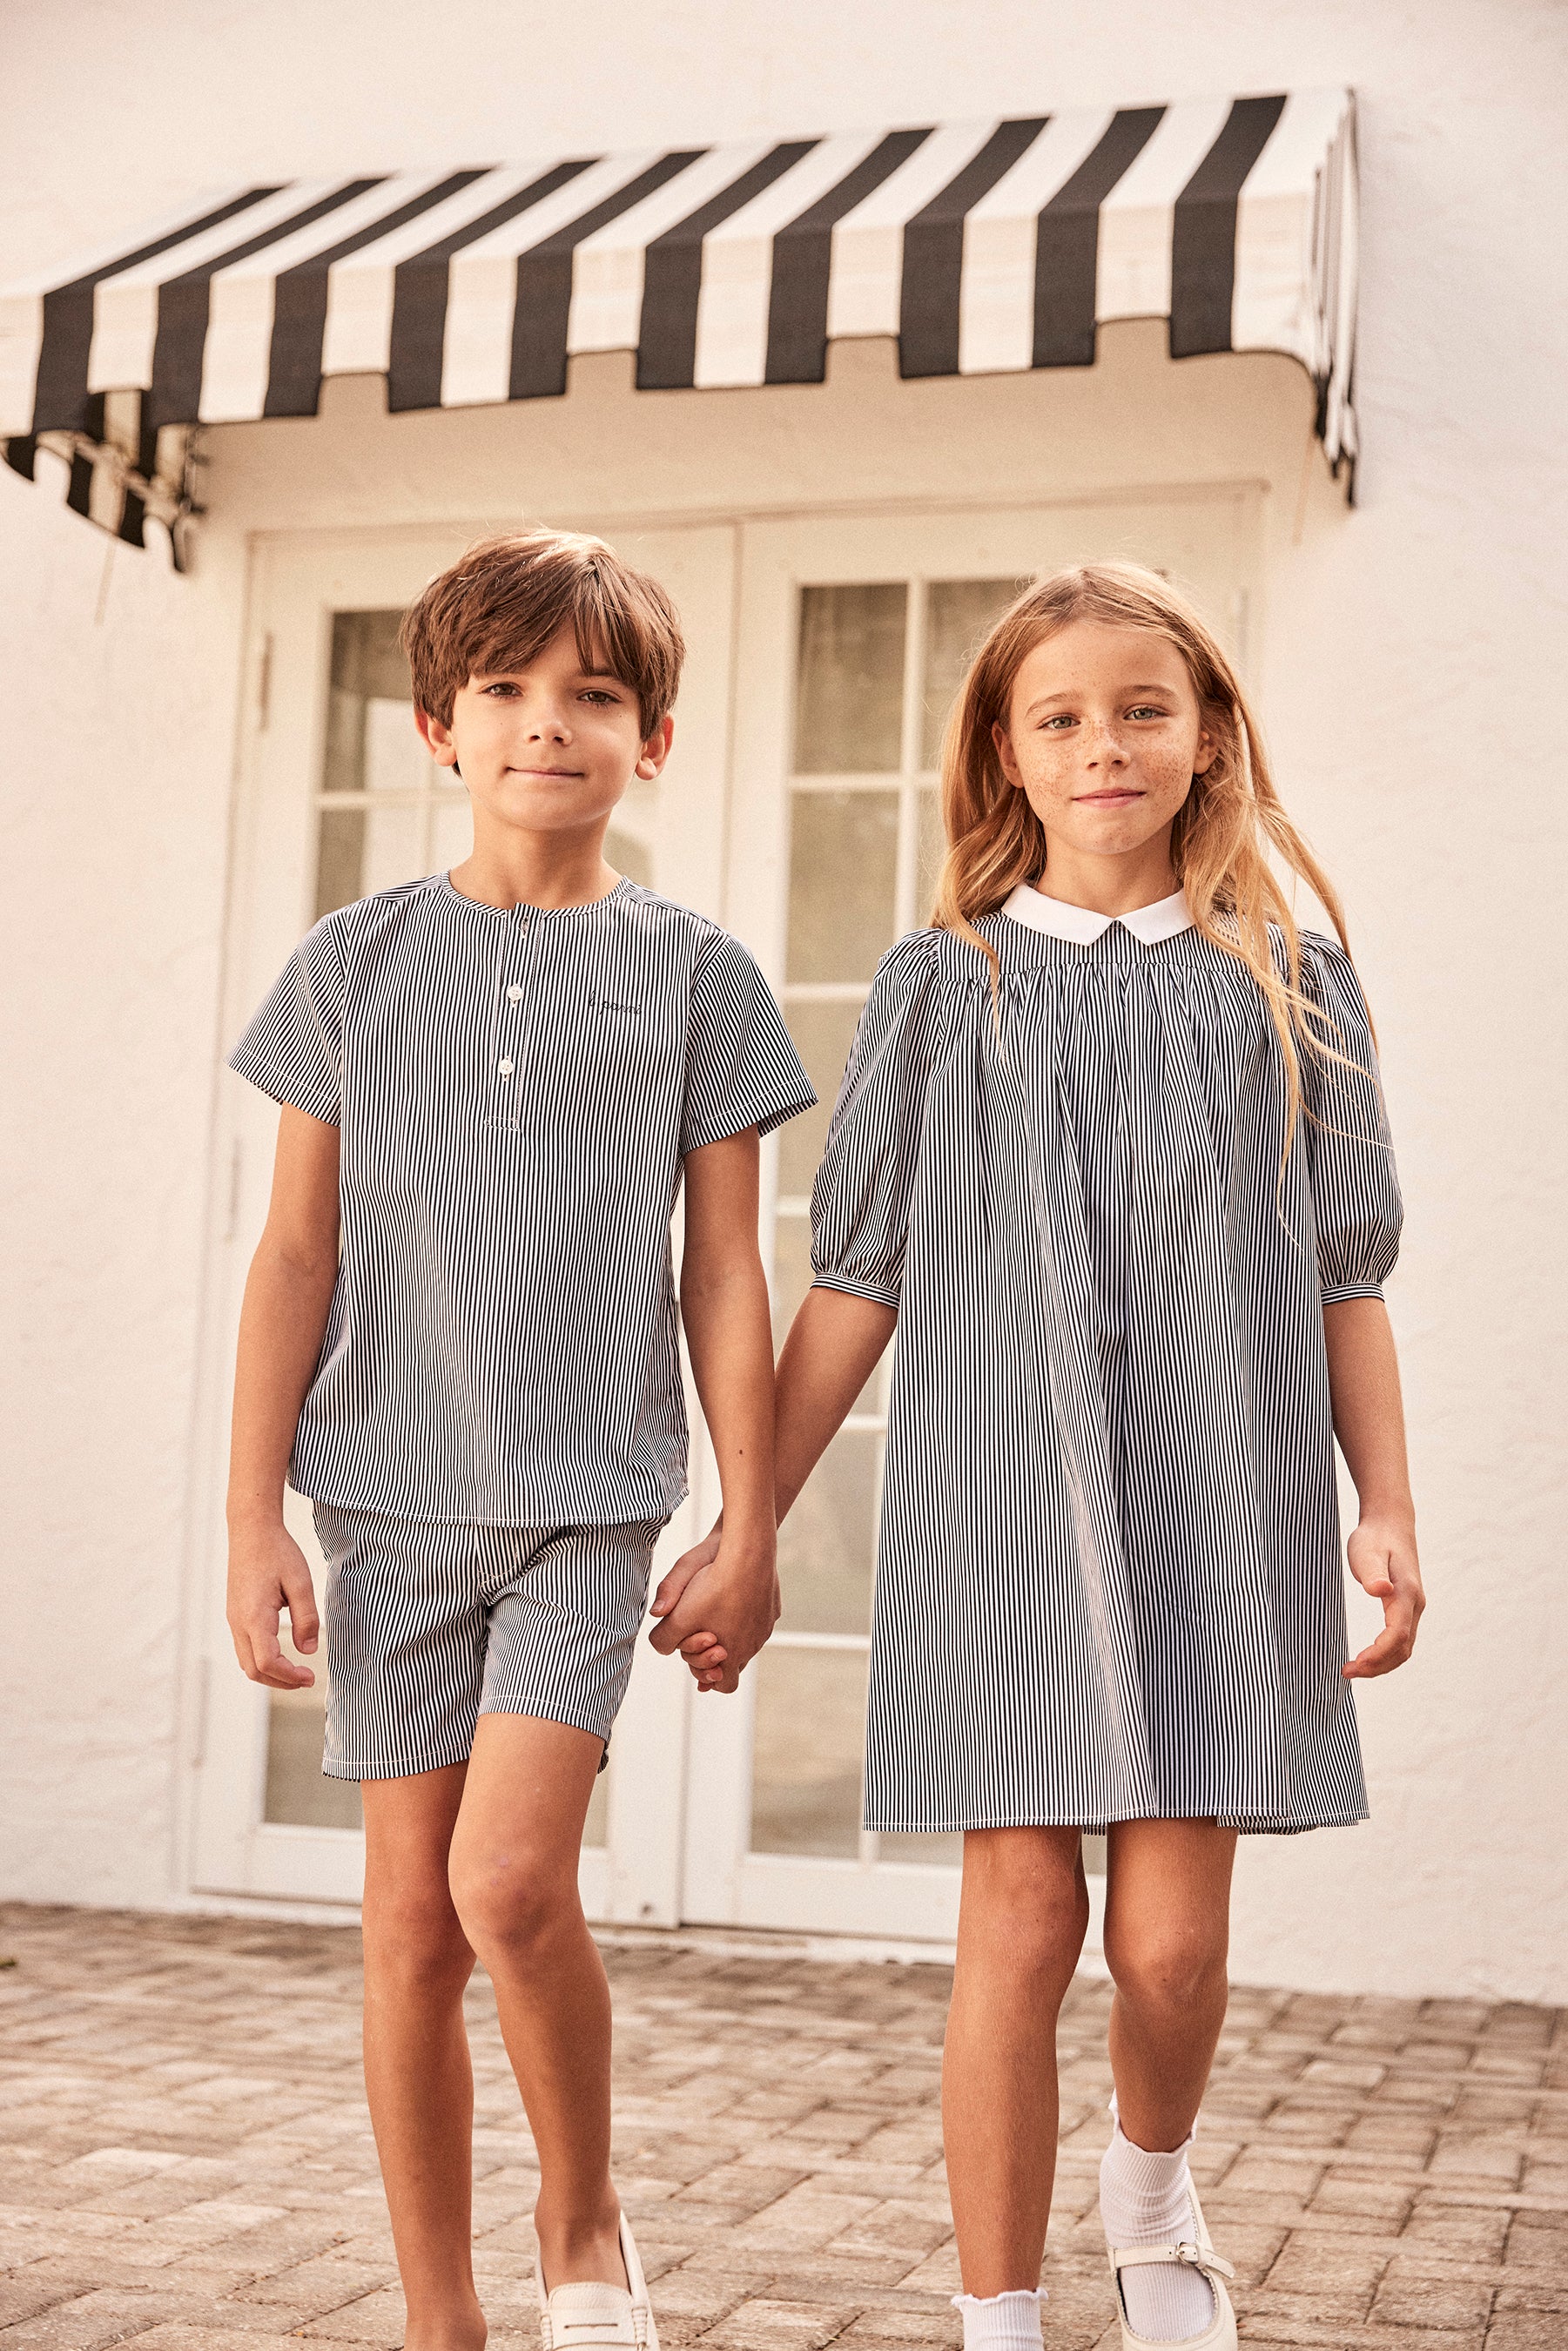 Young boy and girl wearing elegant matching outfits holding hands outside with a pretty home in the background.